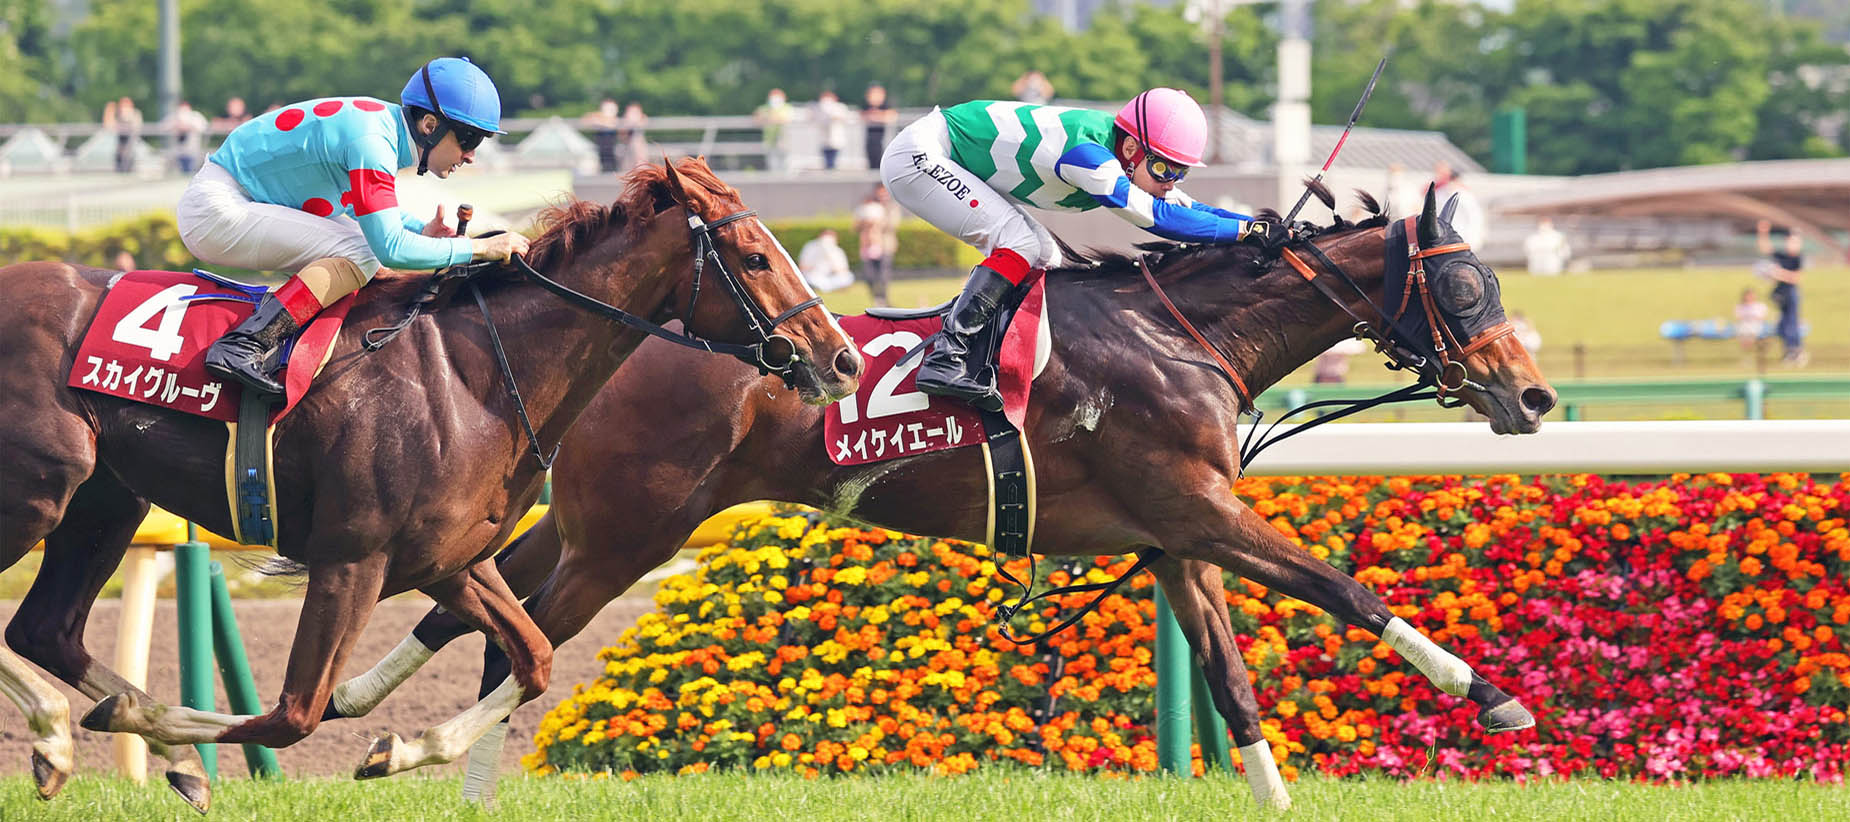 2022 Preakness Stakes Betting Update 3 Horses That Could Upset Epicenter